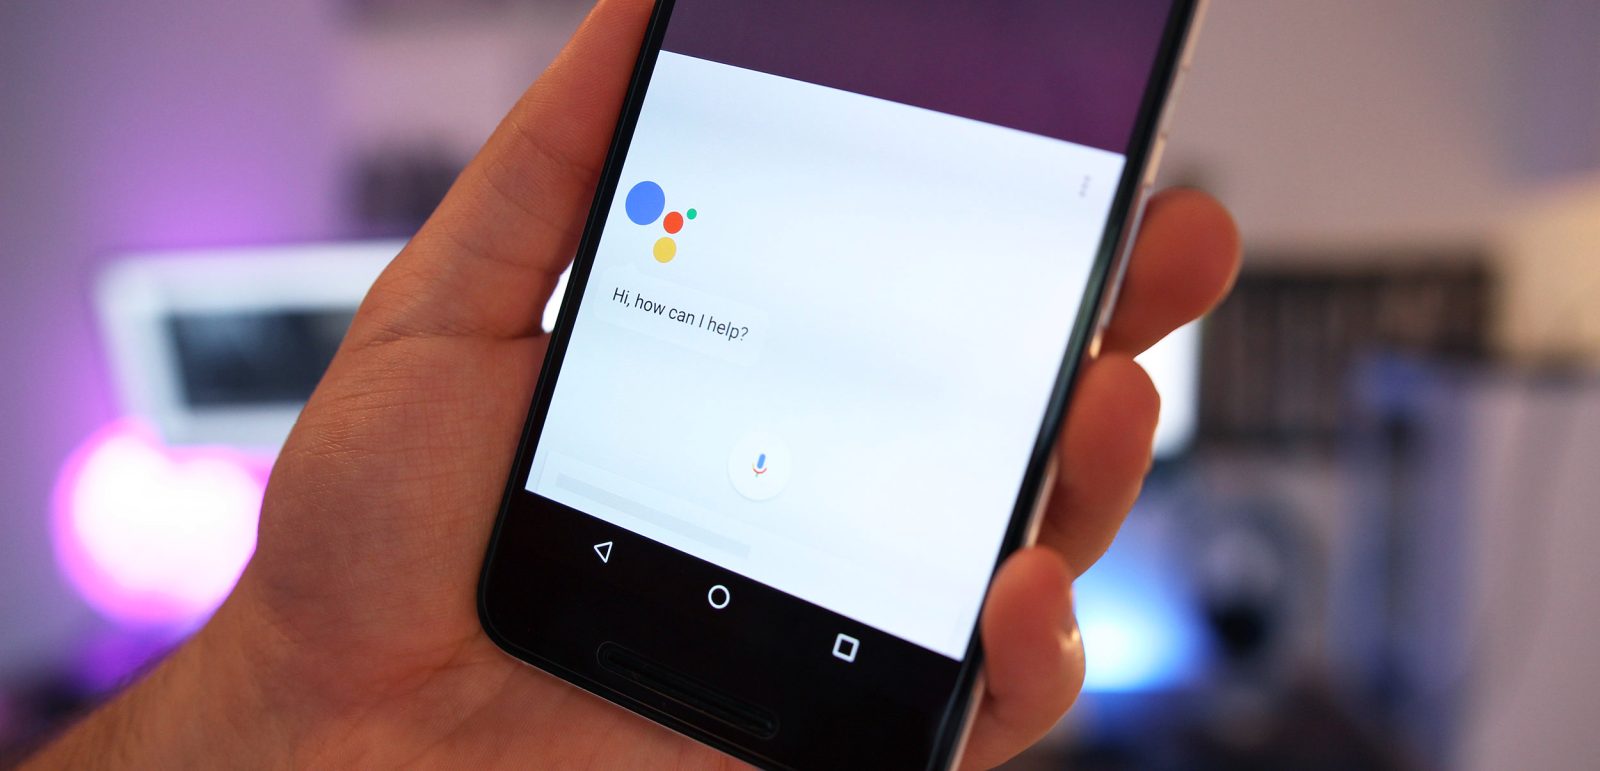 "Hey Google" Wakeup Command is now available for some Android Devices 10